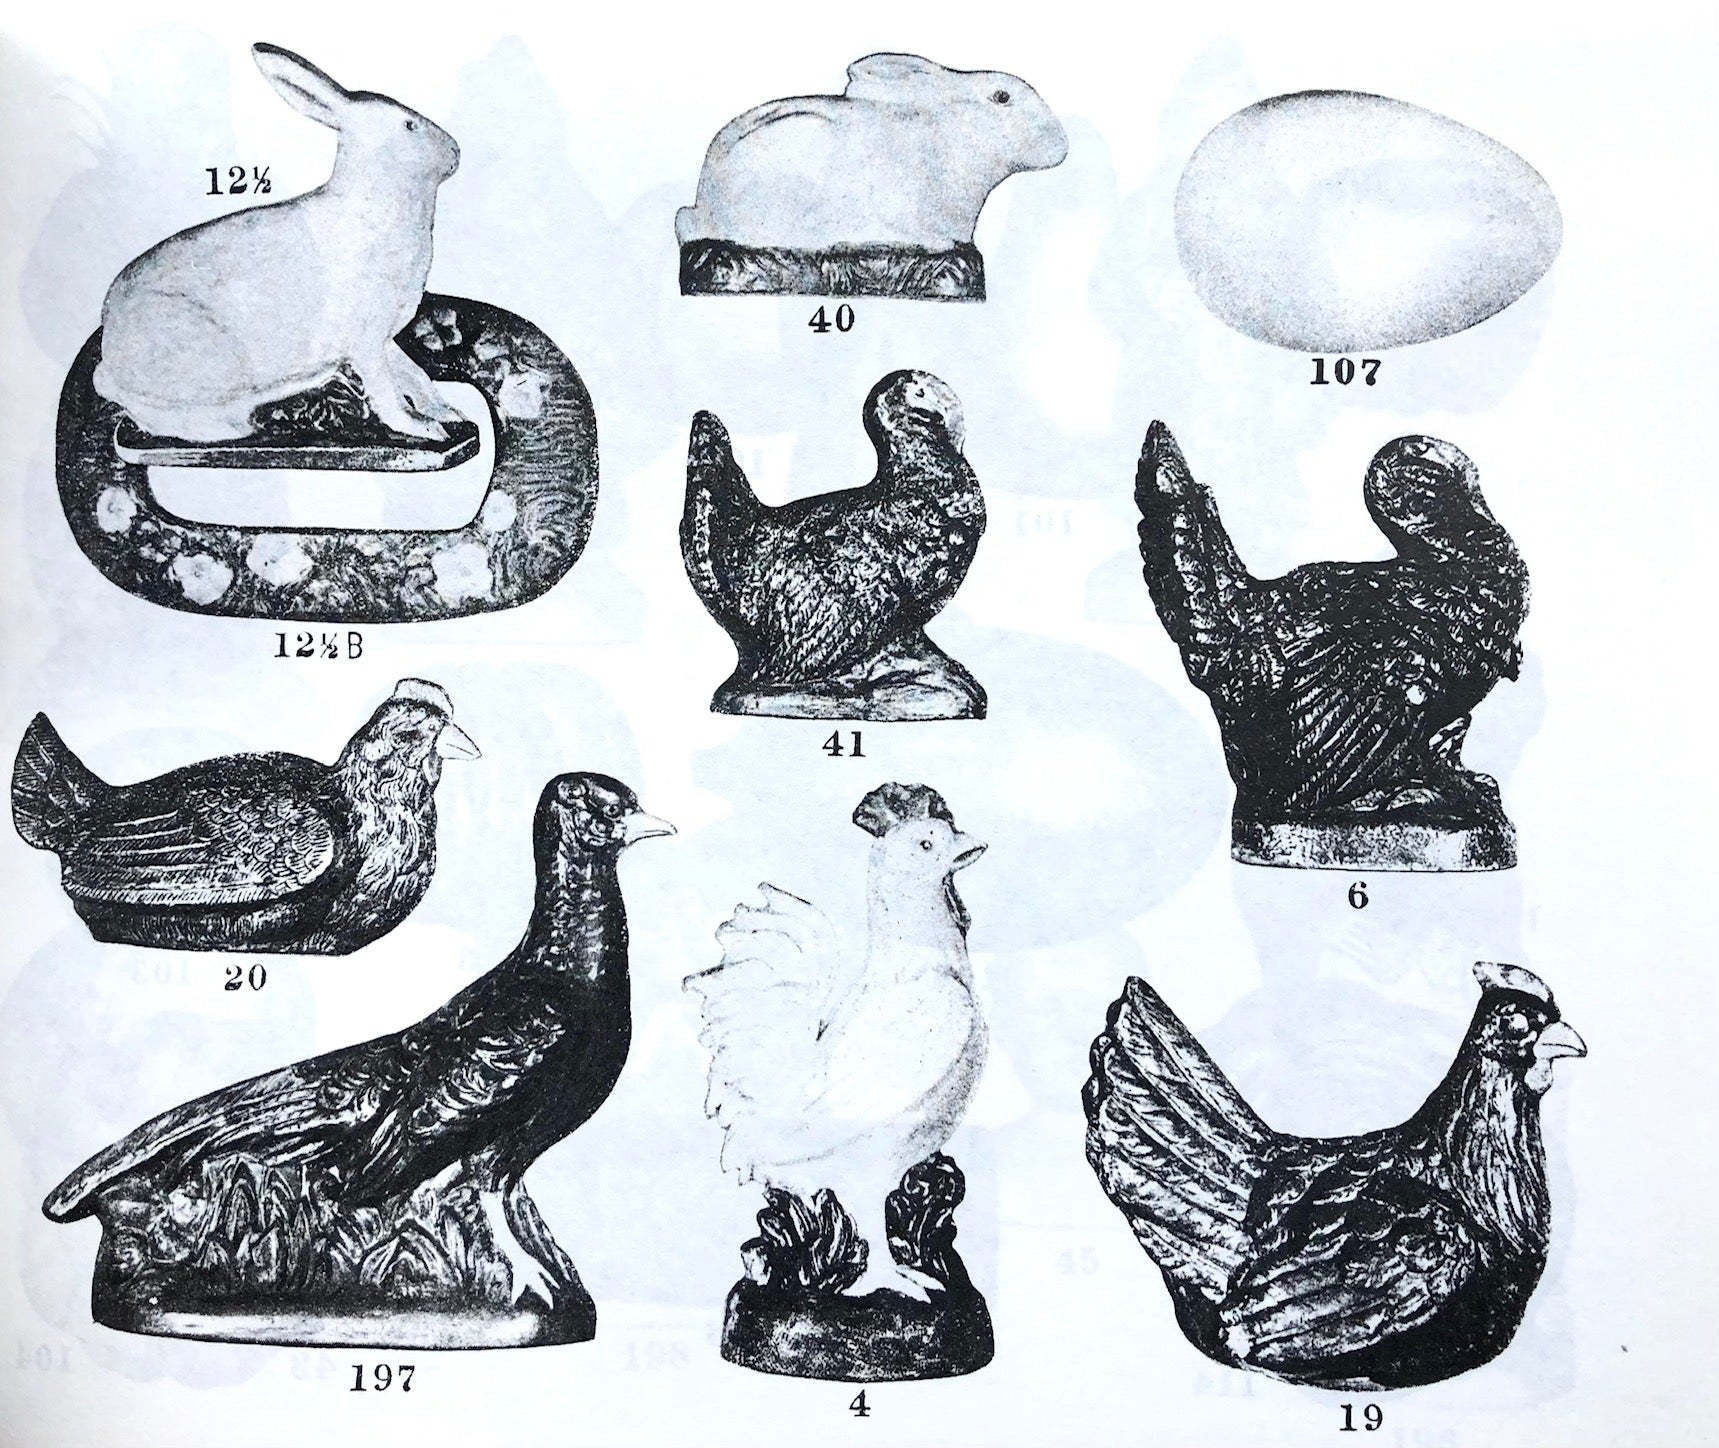 (Ice Cream) Eppelsheimer & Co. A Complete Catalog of Metal Moulds for Ice Cream and Display Models.